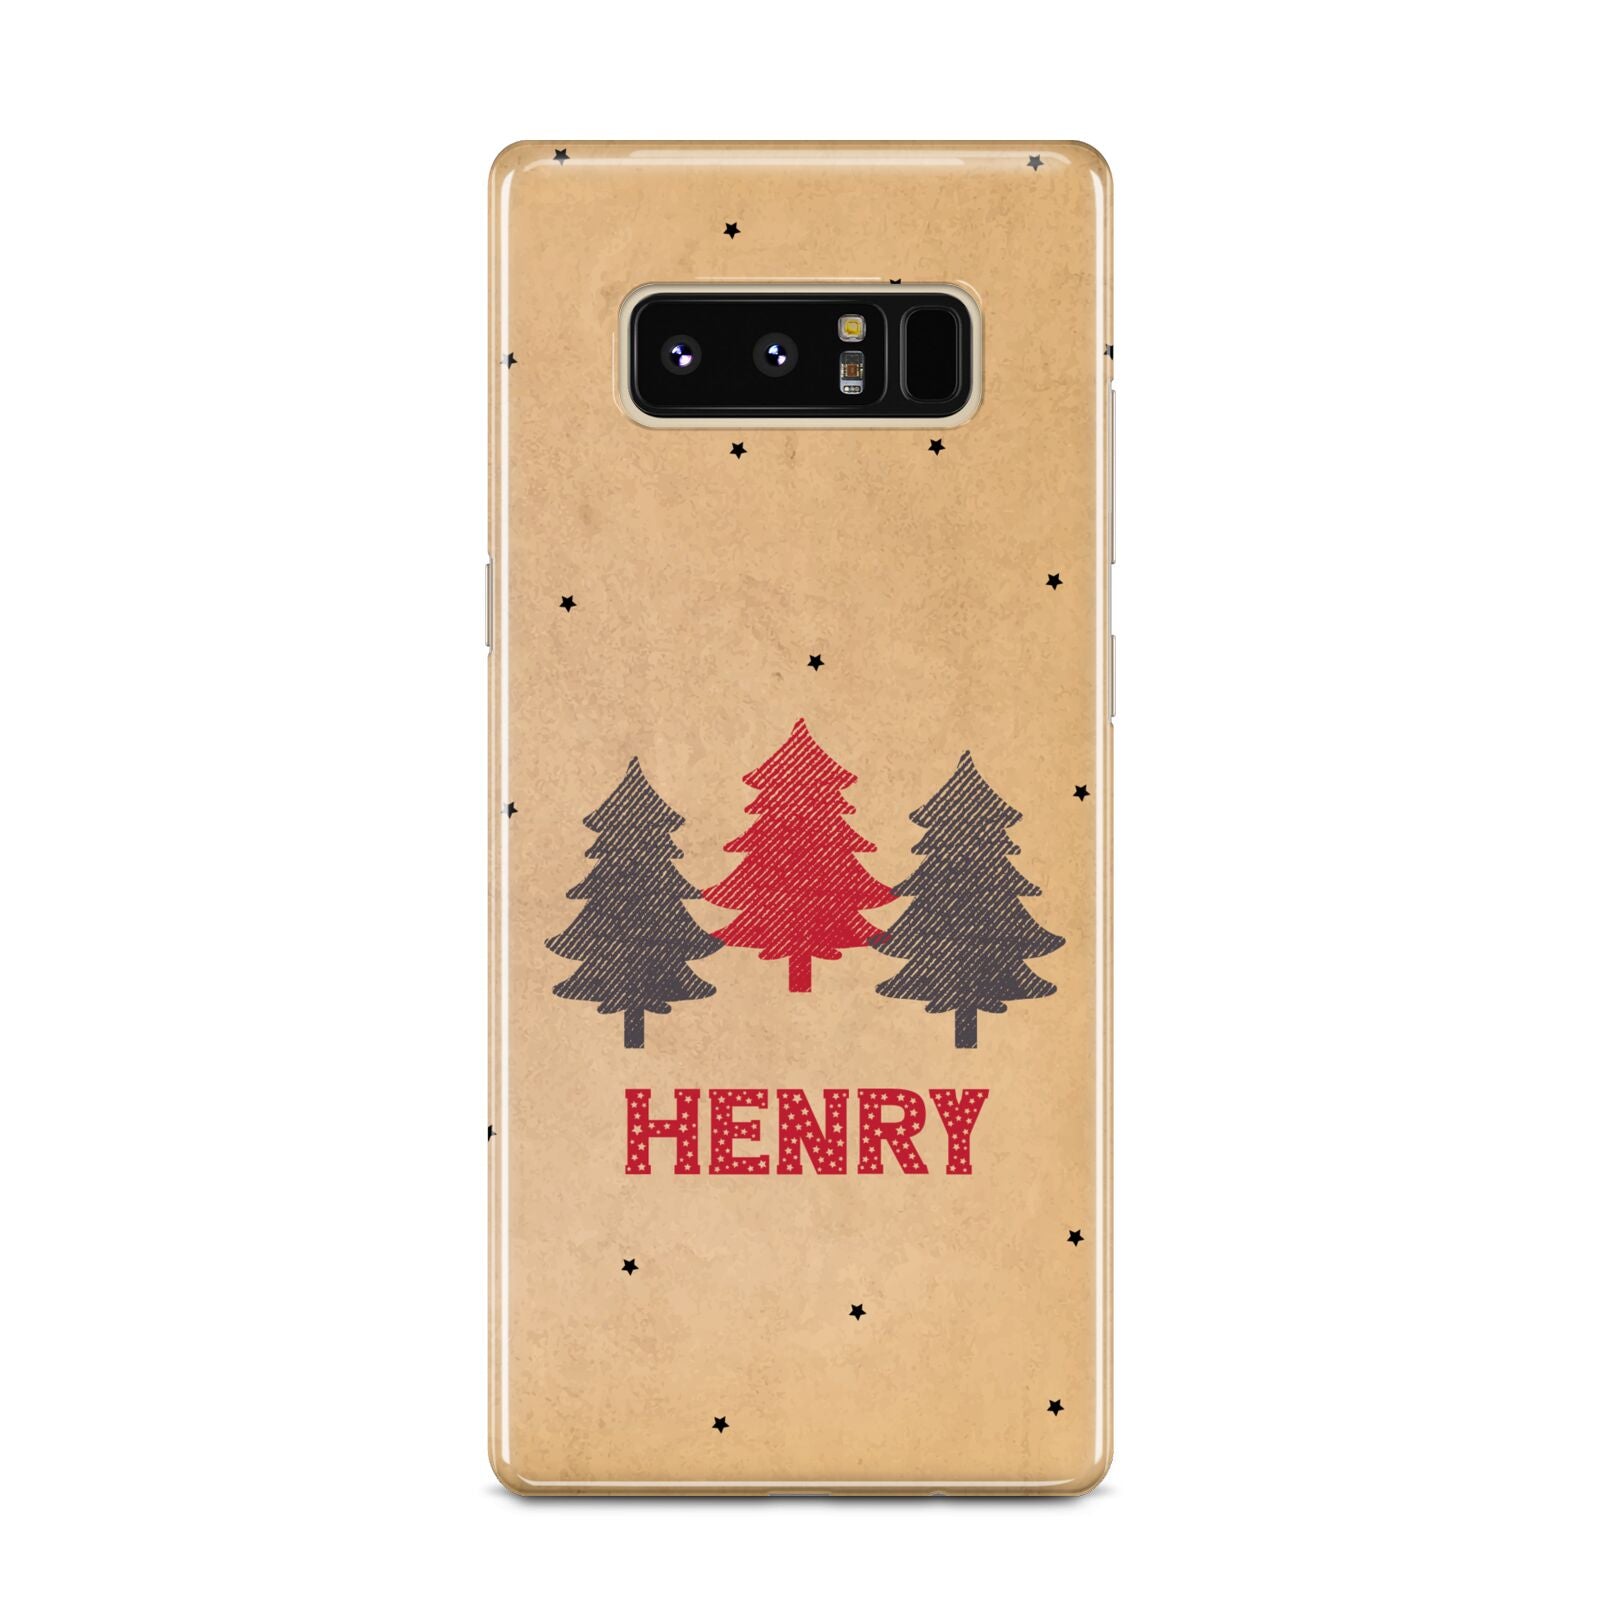 Personalised Christmas Tree Samsung Galaxy Note 8 Case